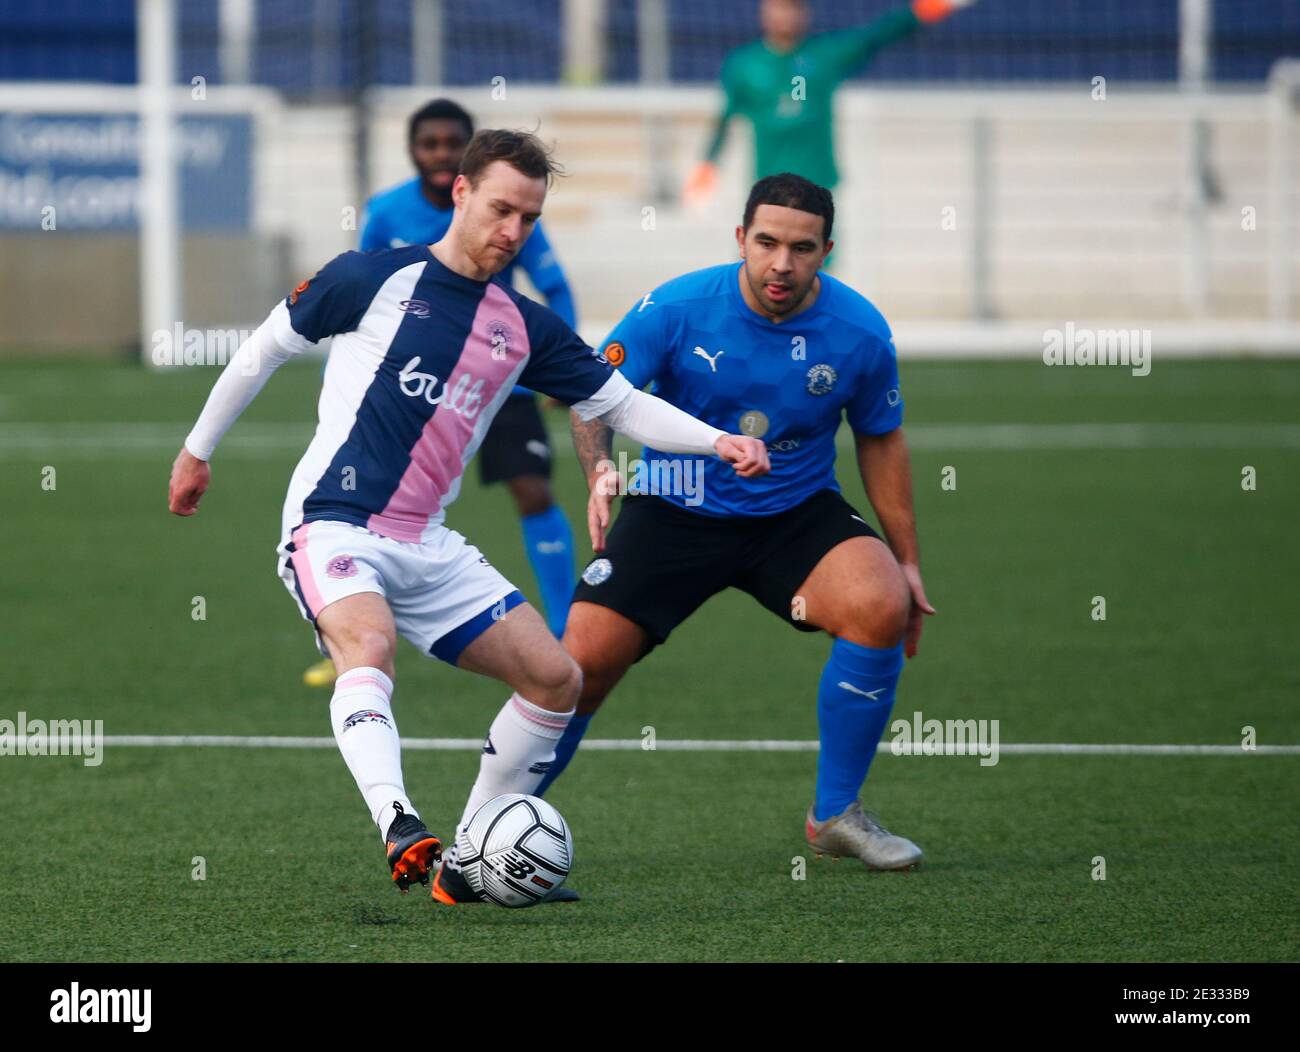 BILLERICAY, United Kingdom, JANUARY16: Jordan Higgs of Dulwich Hamlet during Vanarama National League - South between Billericay Town and of Dulwich Hamlet at New Lodge, Billericay on 16th January, 2021 Credit: Action Foto Sport/Alamy Live News Stock Photo